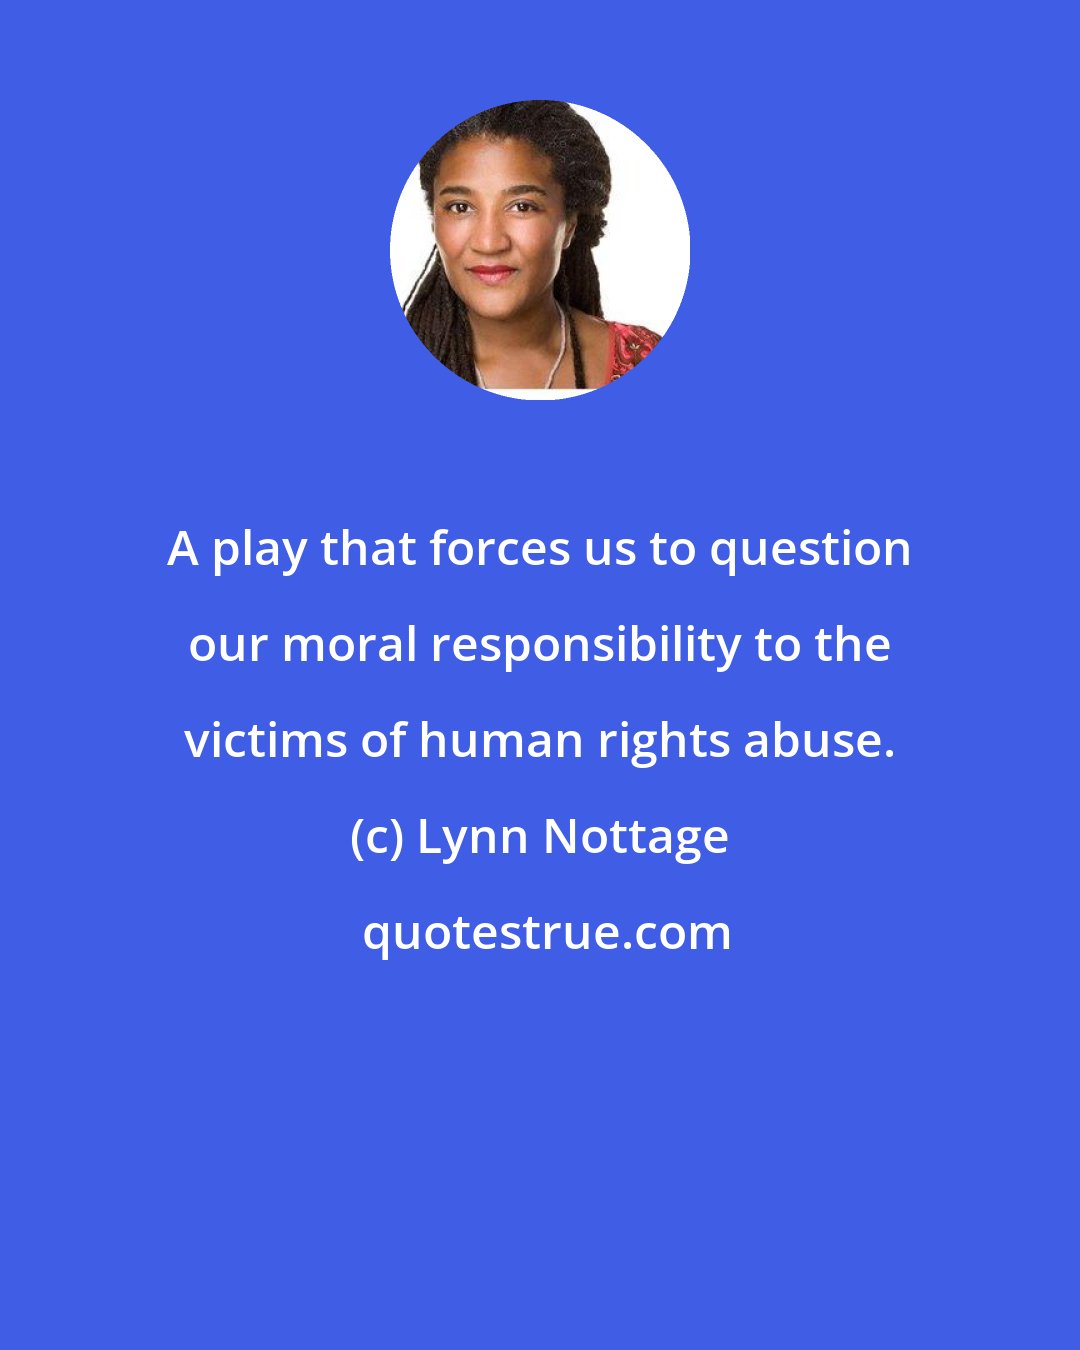 Lynn Nottage: A play that forces us to question our moral responsibility to the victims of human rights abuse.